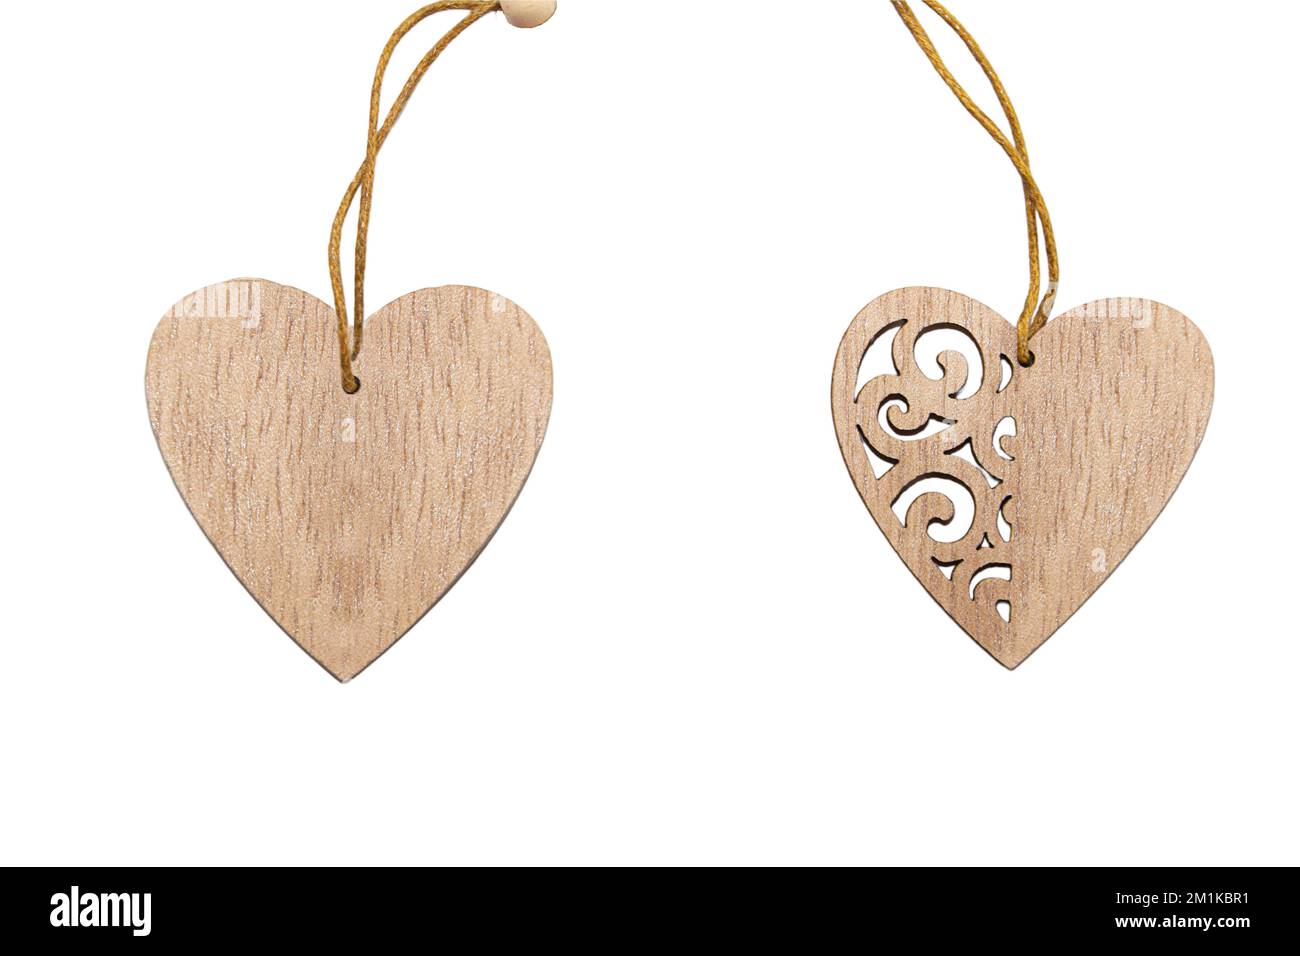 Two wooden hearts with rope, carved ornament on white isolated background. Design element. Valentine's Day Stock Photo